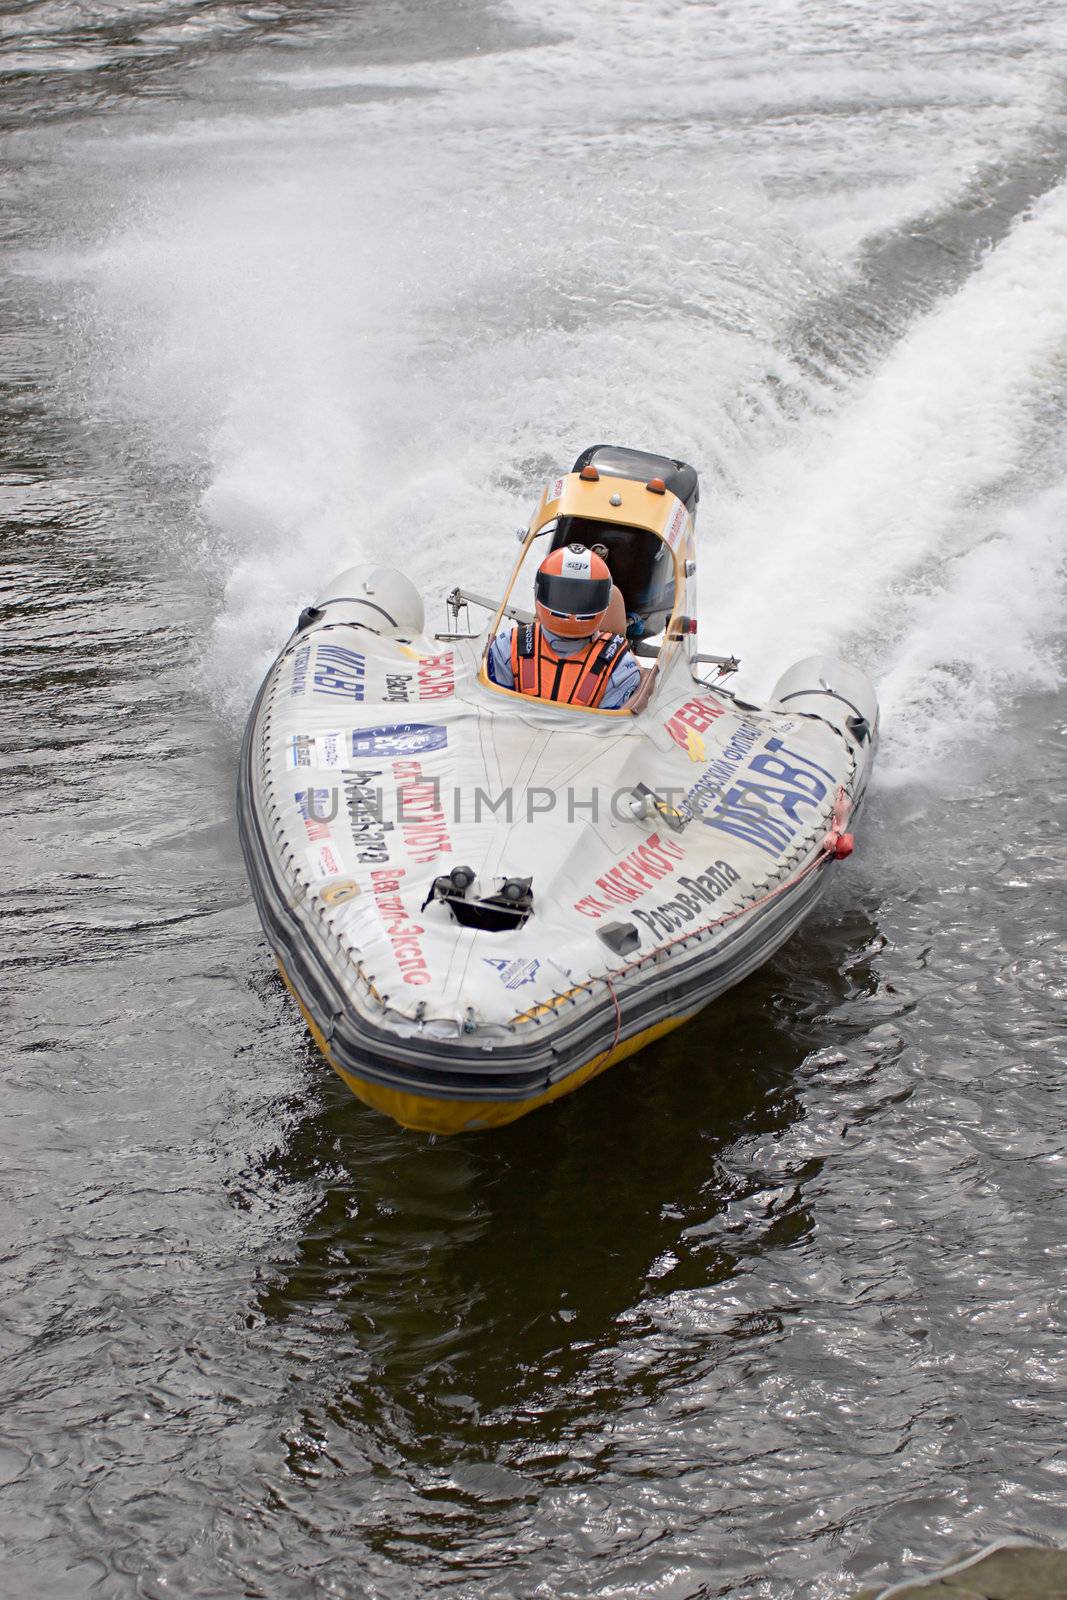 Cup of St.-Petersburg on water-motor to sports. "24 hours St.-Petersburg" 2007 Russia